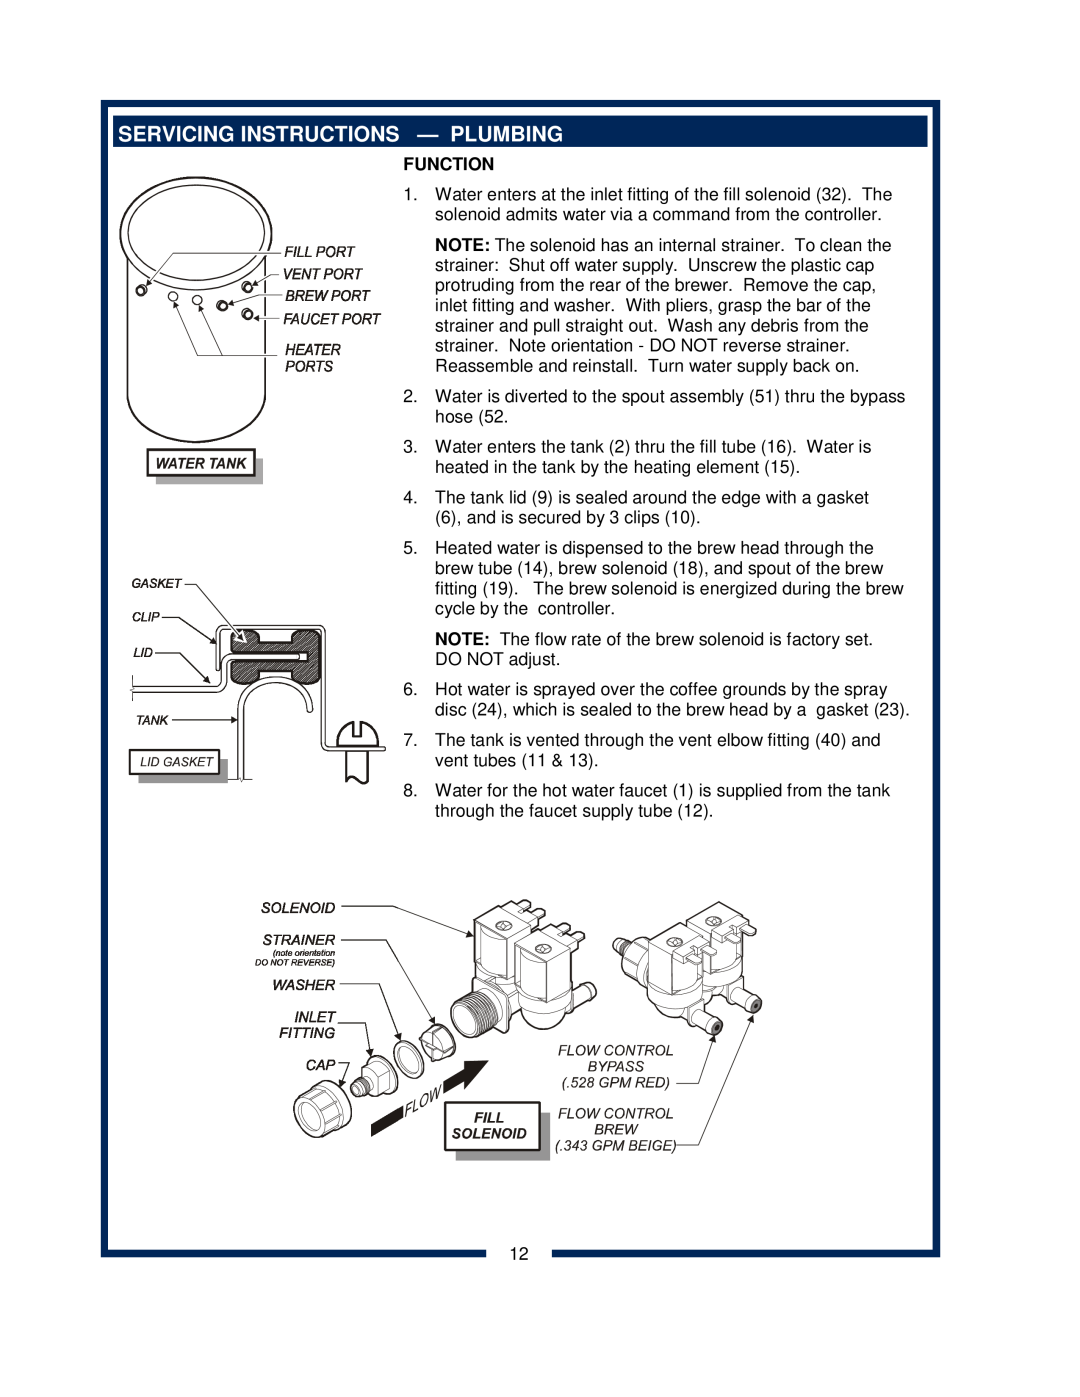 Bloomfield 2030 owner manual Servicing Instructions - Plumbing, Function 